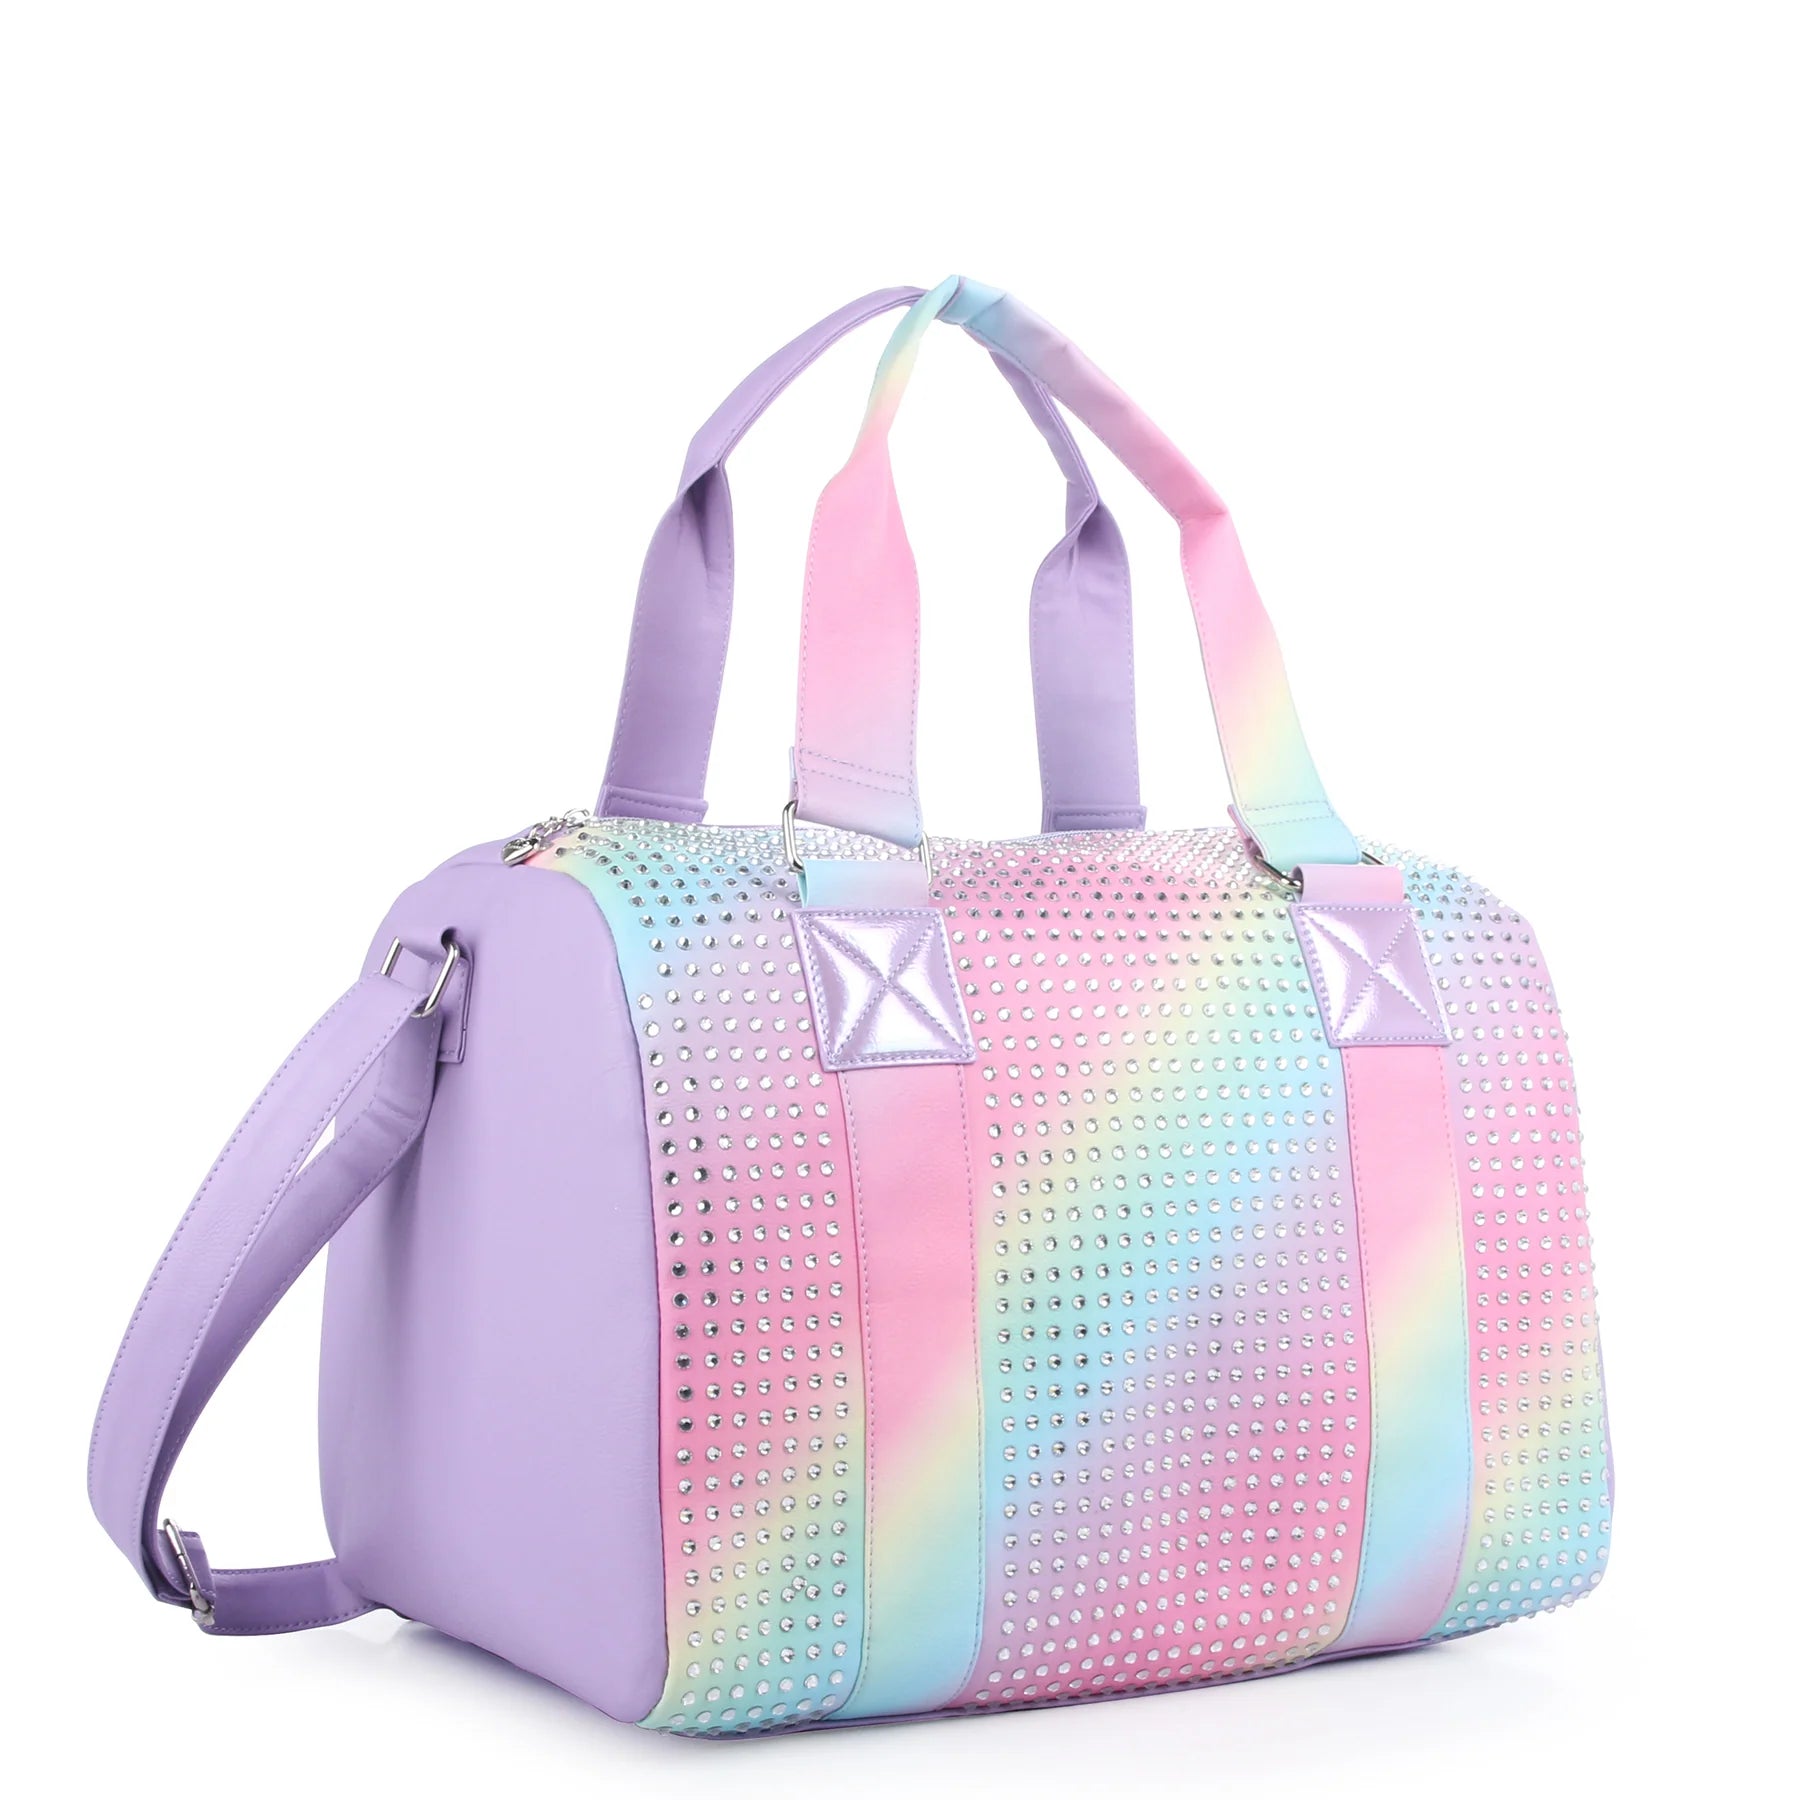 OMG OCCESSORIES STUDDED OMBRE DUFFLE BAG